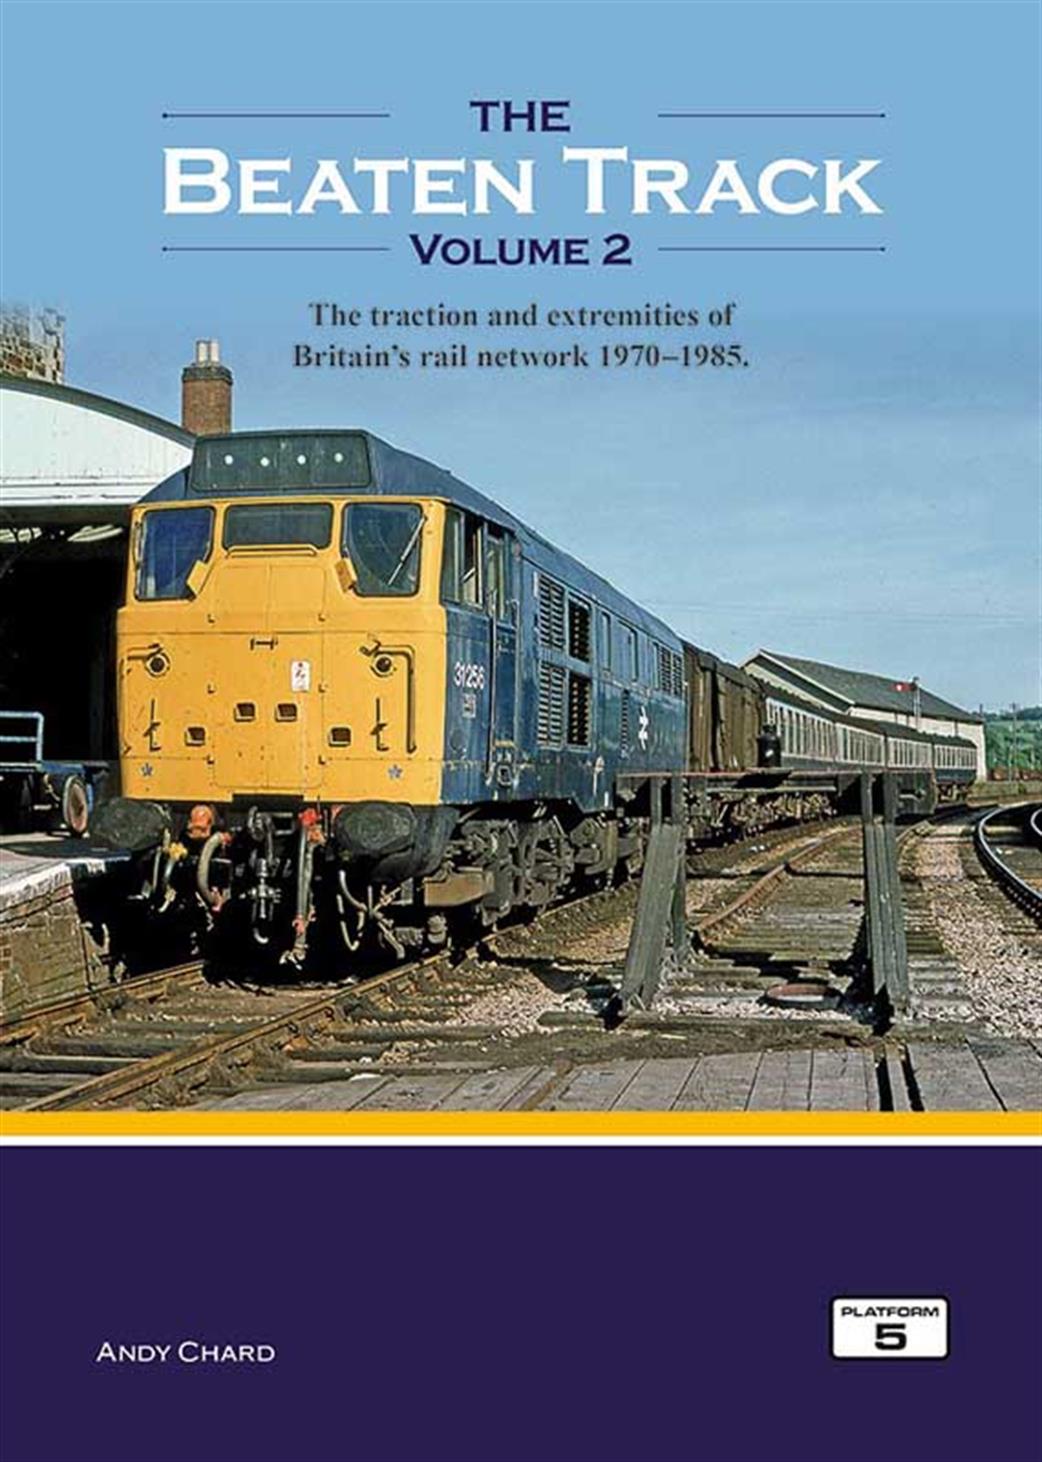 Platform 5  TBT2 The Beaten Track Volume 2 More Traction & Extremities 1970-1985 By Andy Chard